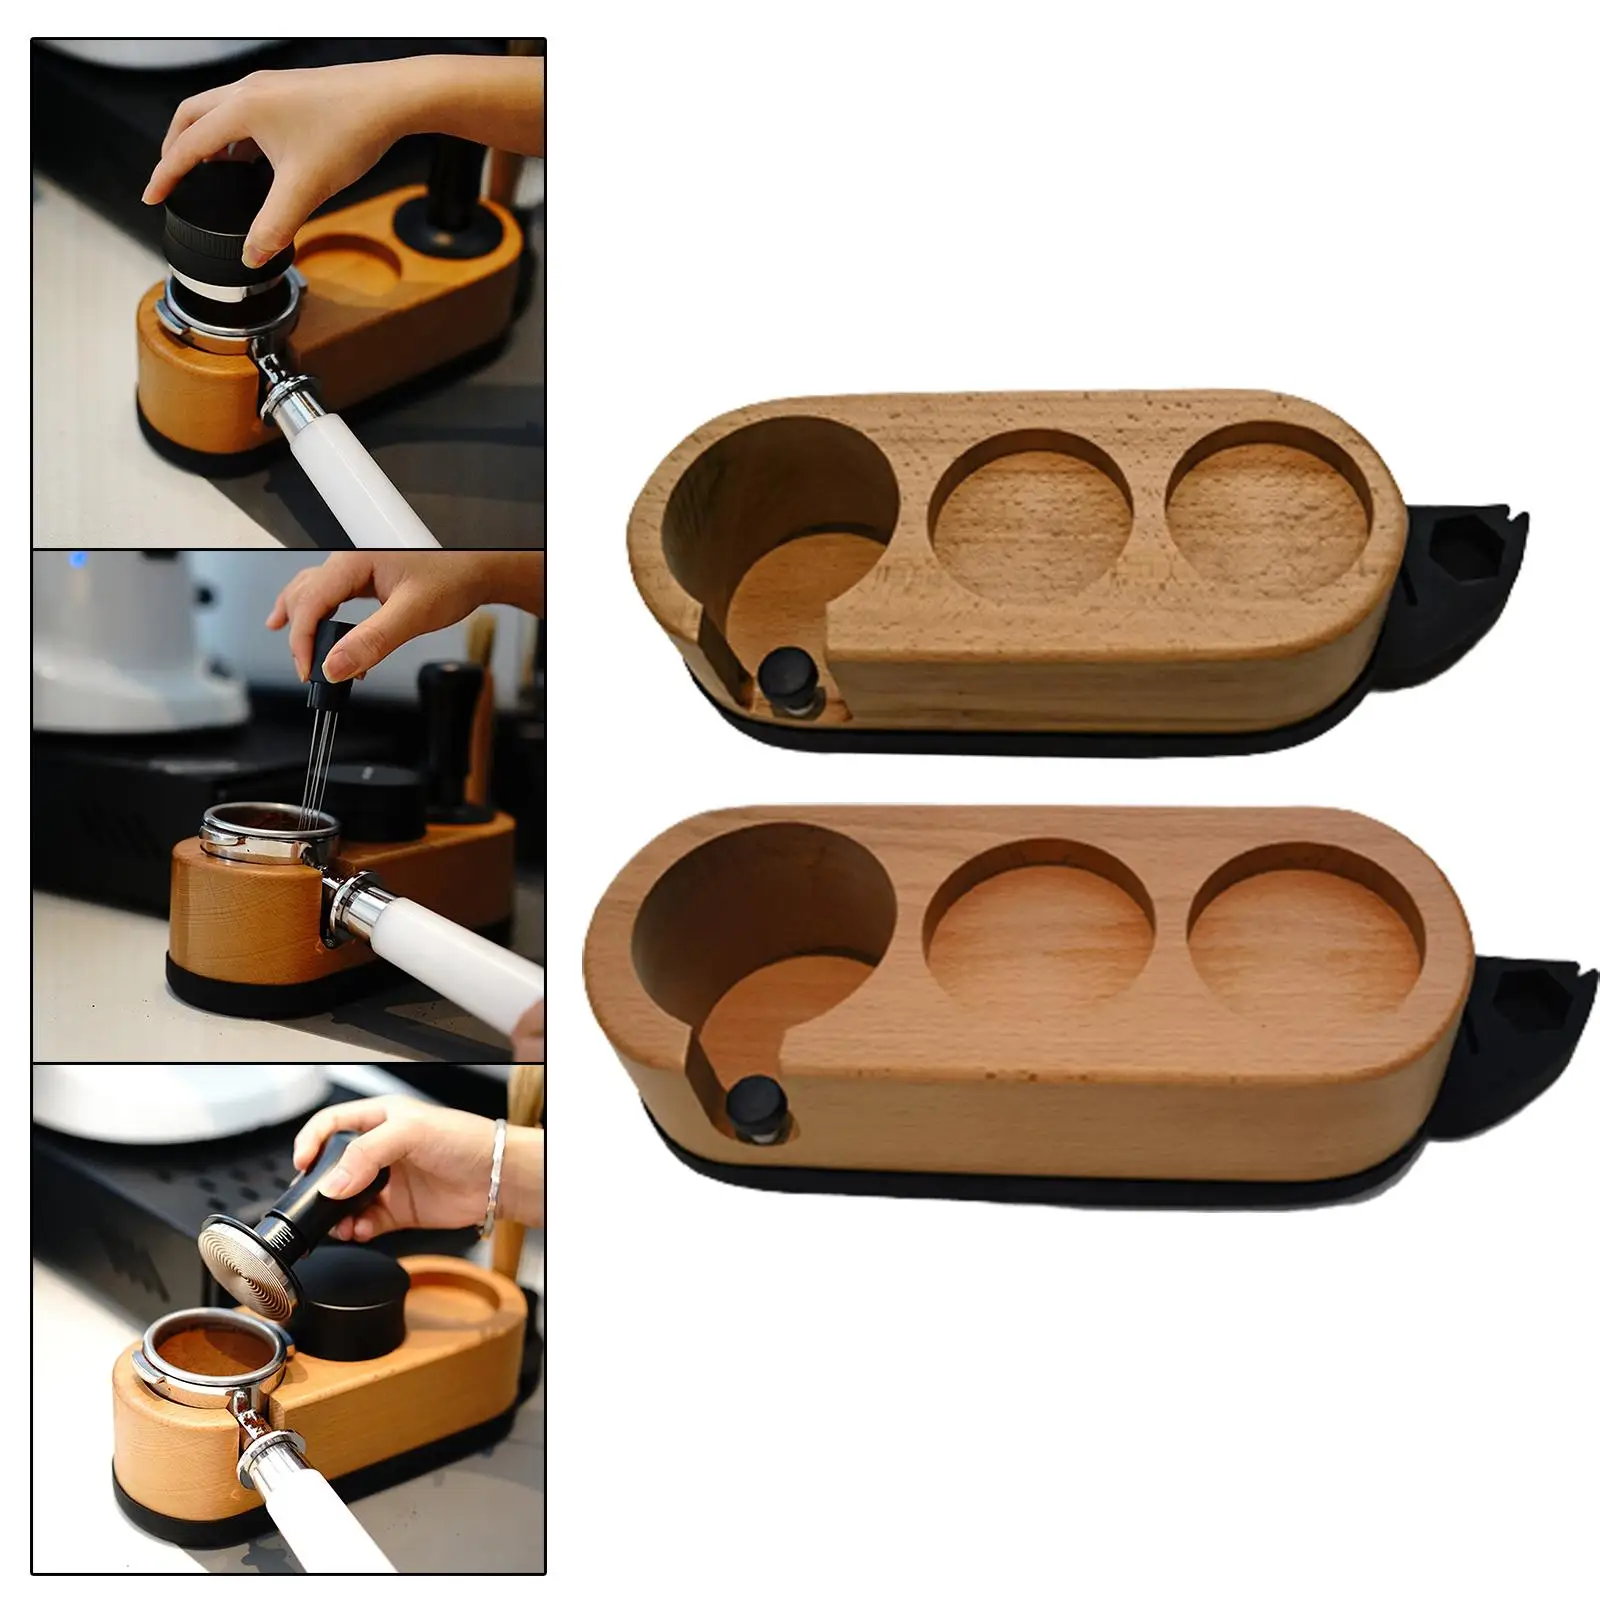 Tamper Station Non Slip Wooden Coffee Portafilter Holder Coffee Tamper Holder Station for Portafilters Kitchen Counter Bar Cafe